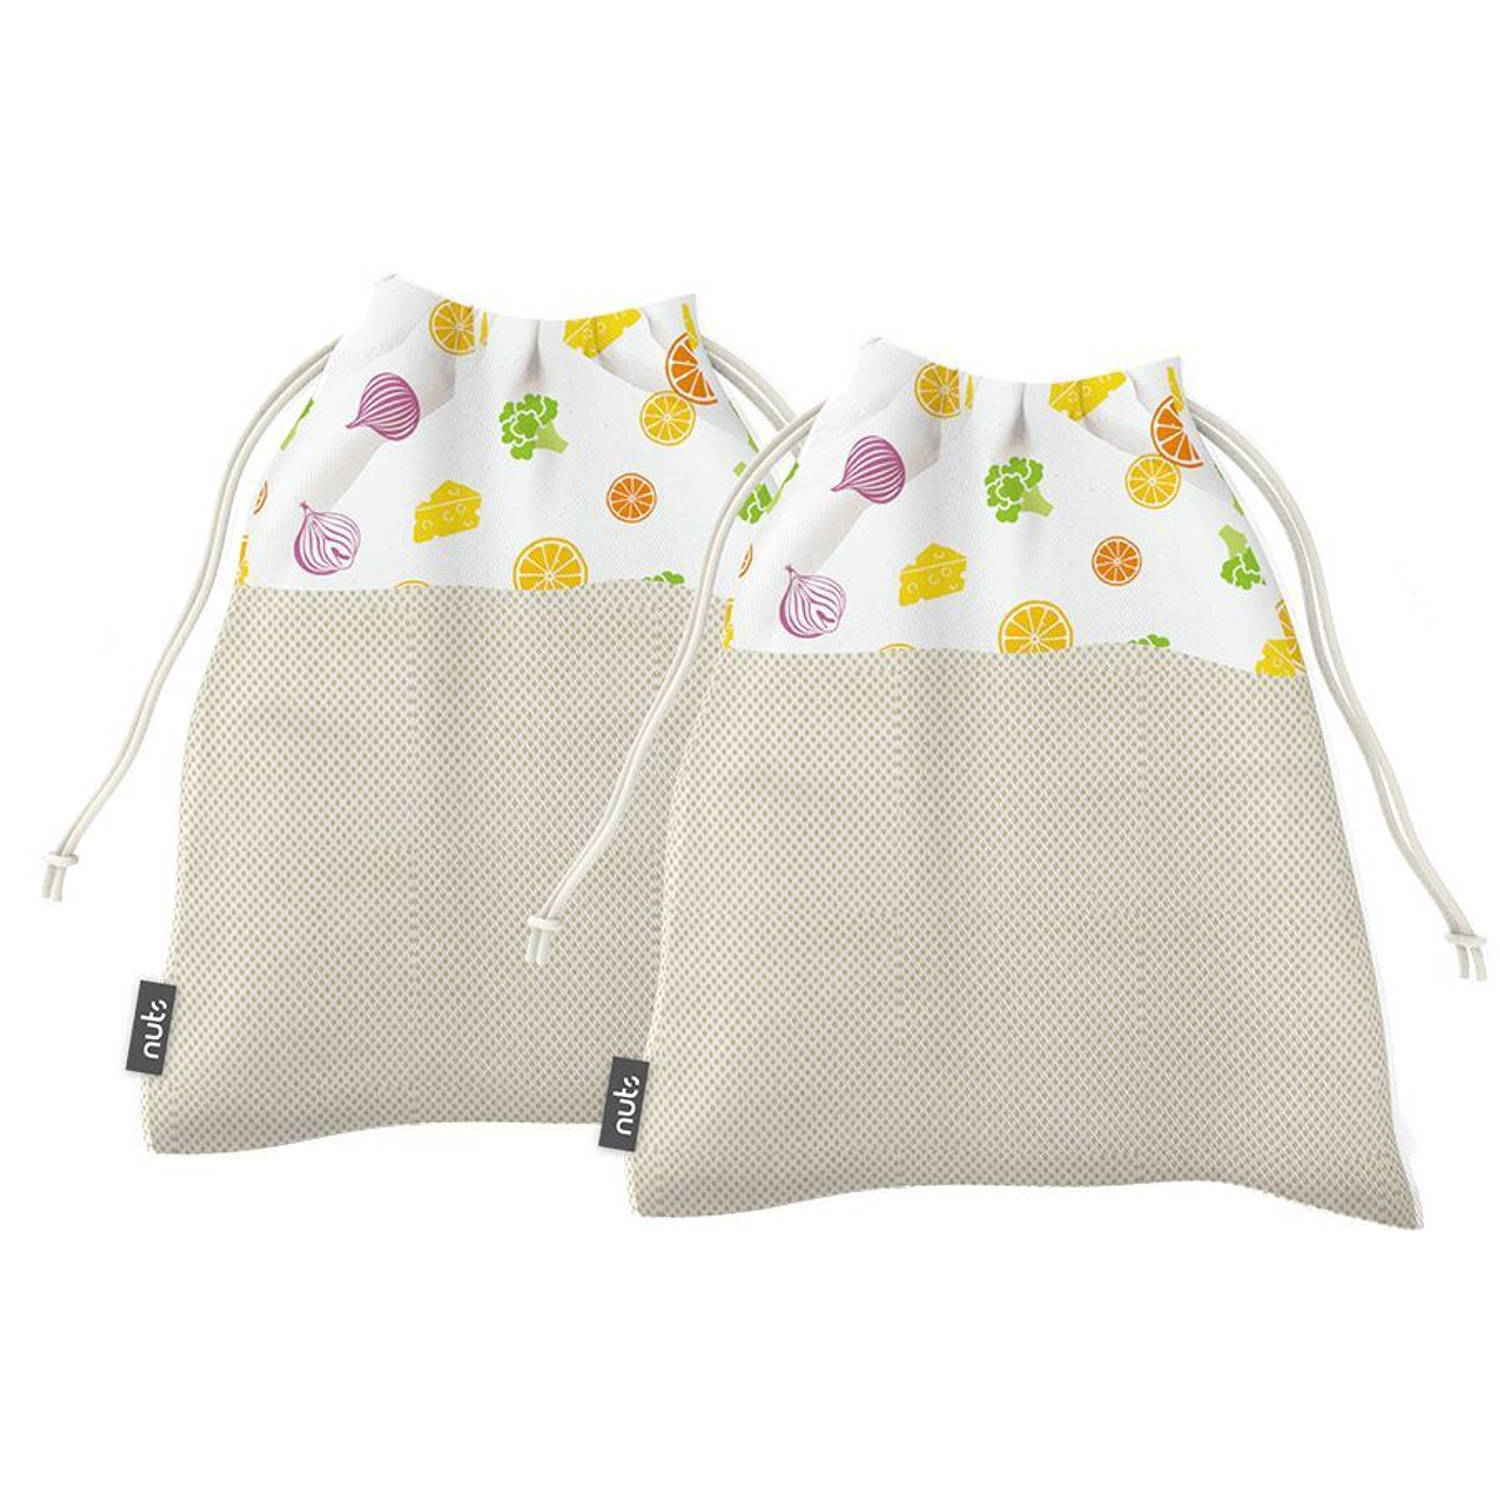 Bee's Wax - Fruit & Vegetable Mesh Produce Bags Set of 2 Small